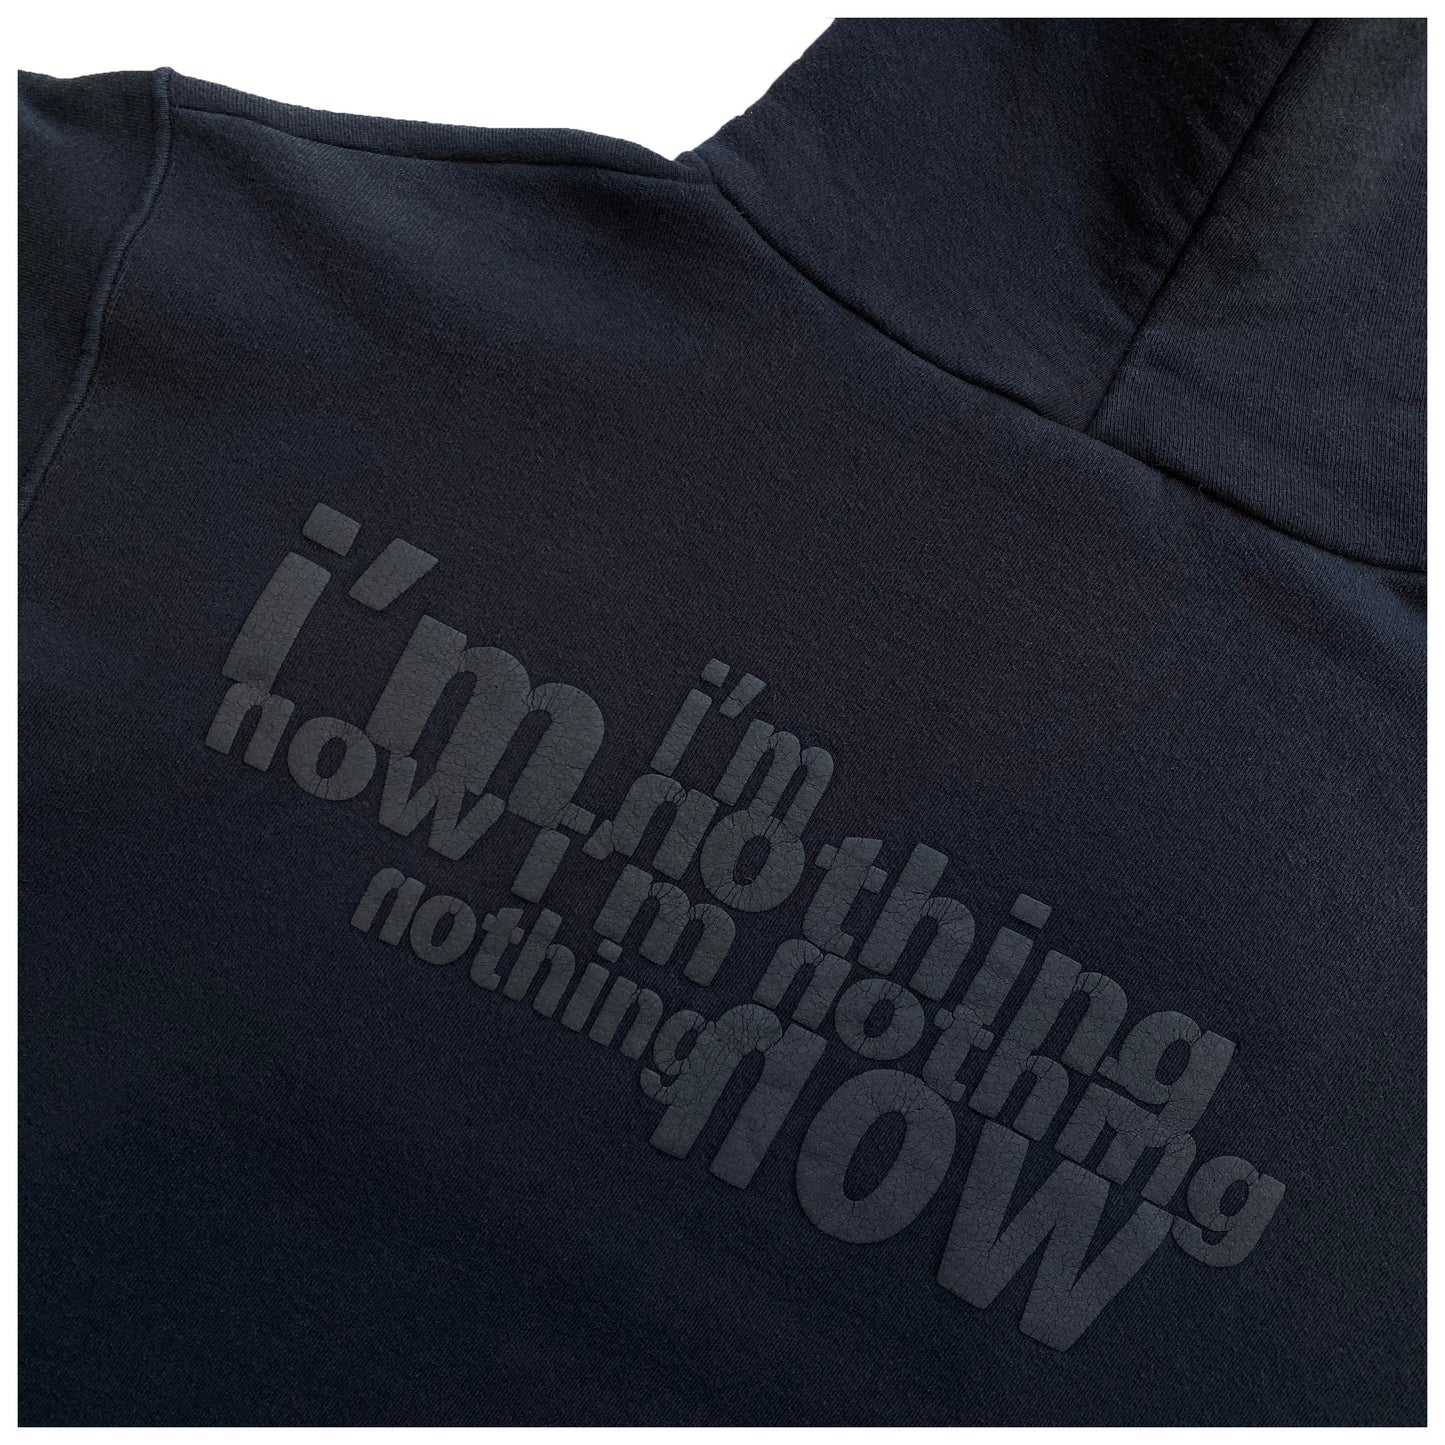 90's NINE INCH NAILS "now i'm nothing" HOODIE